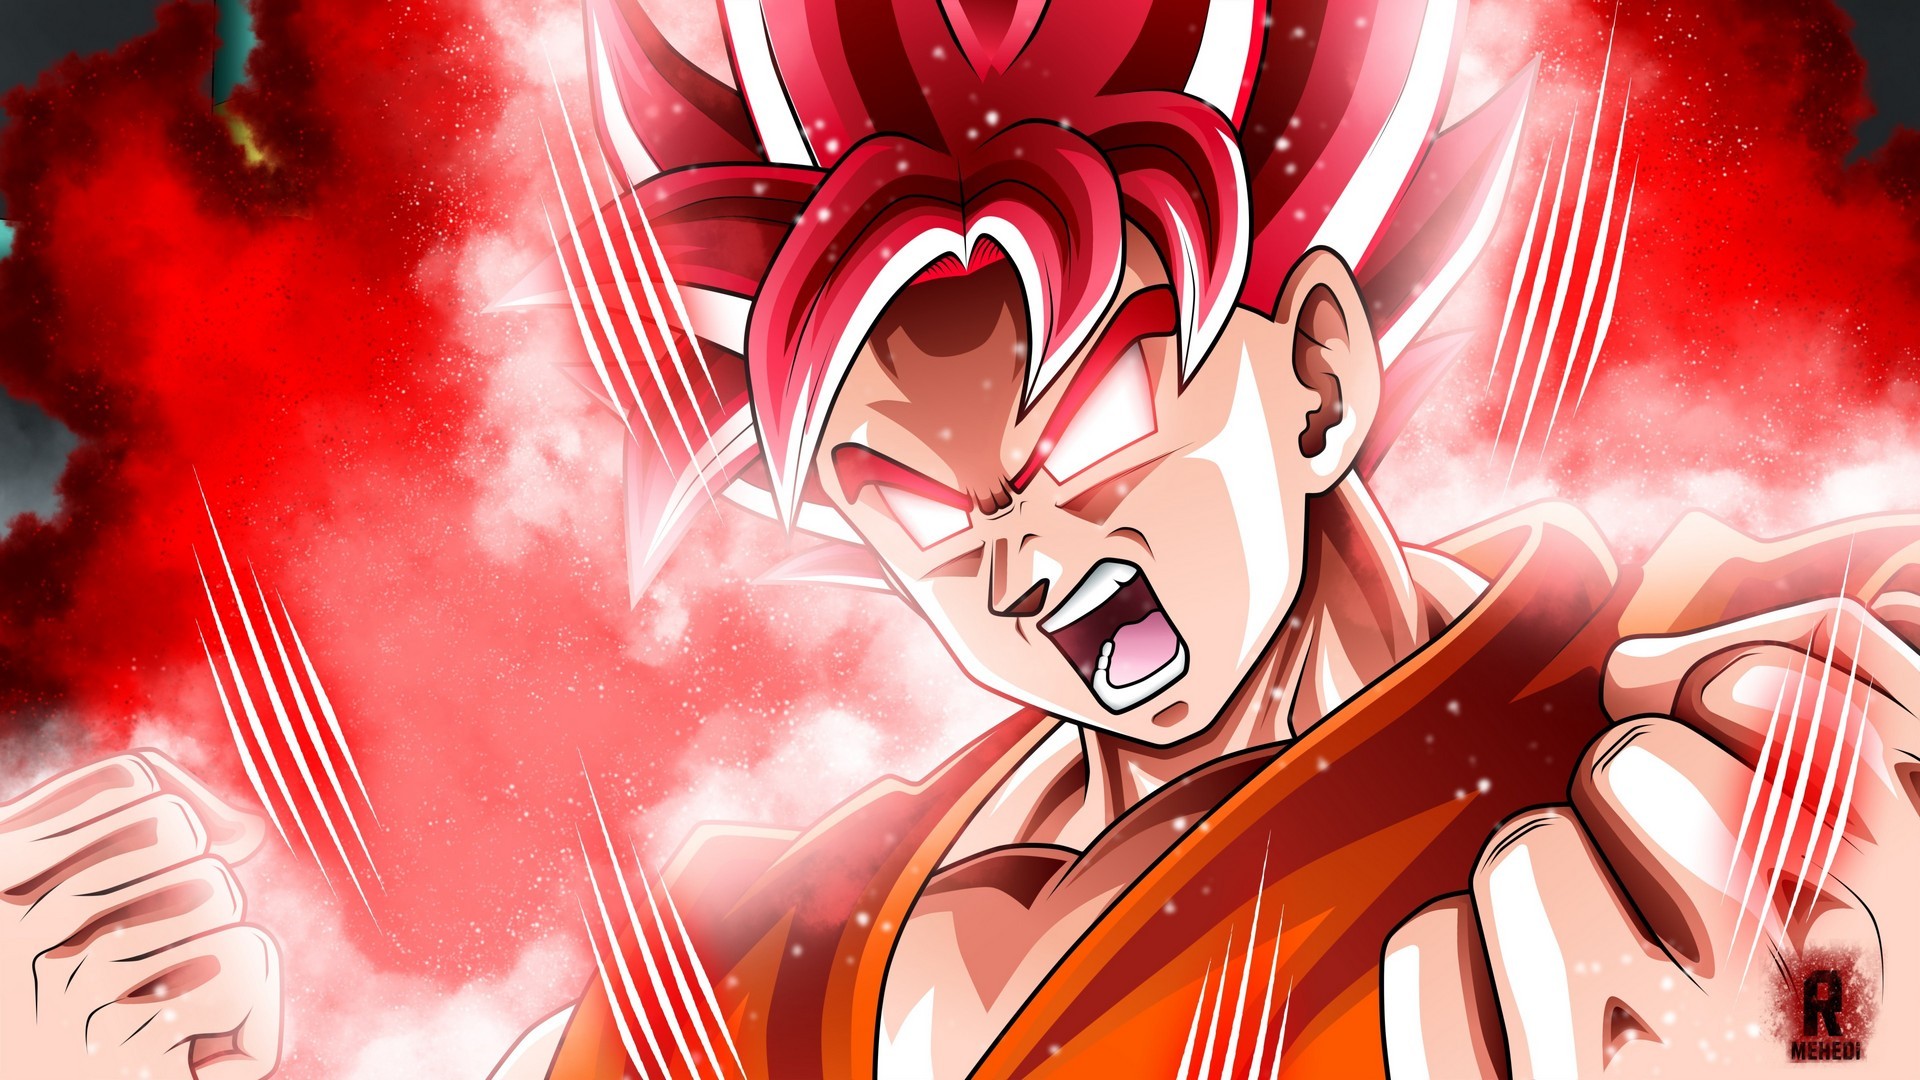 Goku Super Saiyan God Desktop Wallpaper with resolution 1920X1080 pixel. You can use this wallpaper as background for your desktop Computer Screensavers, Android or iPhone smartphones